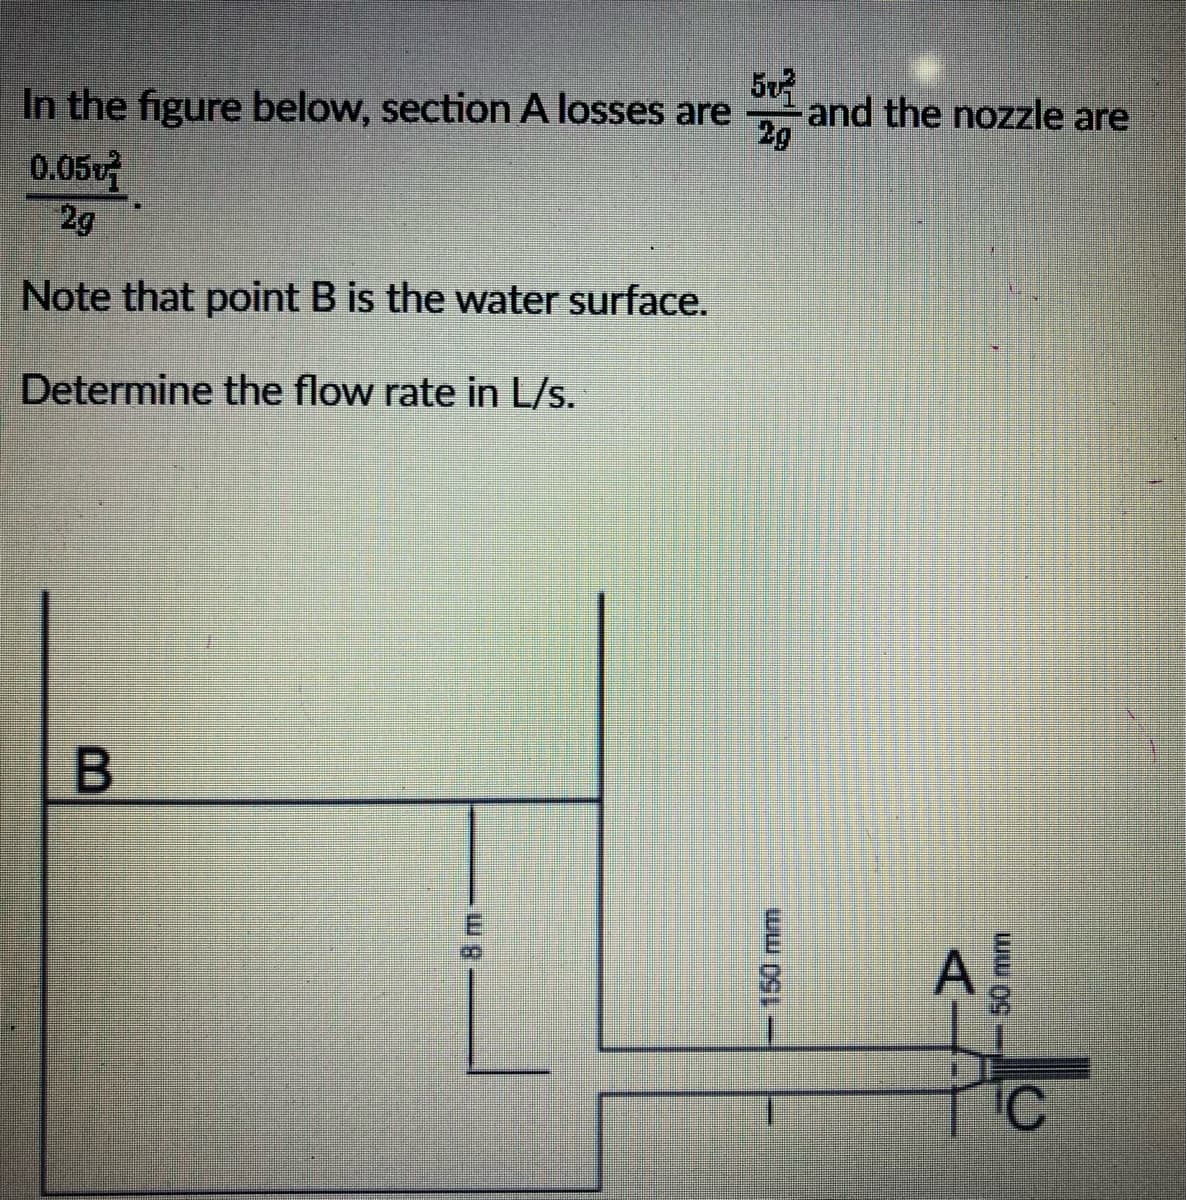 50²
In the figure below, section A losses are
2g
0.05
2g
Note that point B is the water surface.
Determine the flow rate in L/s.
B
150 mm
and the nozzle are
A
50 mm